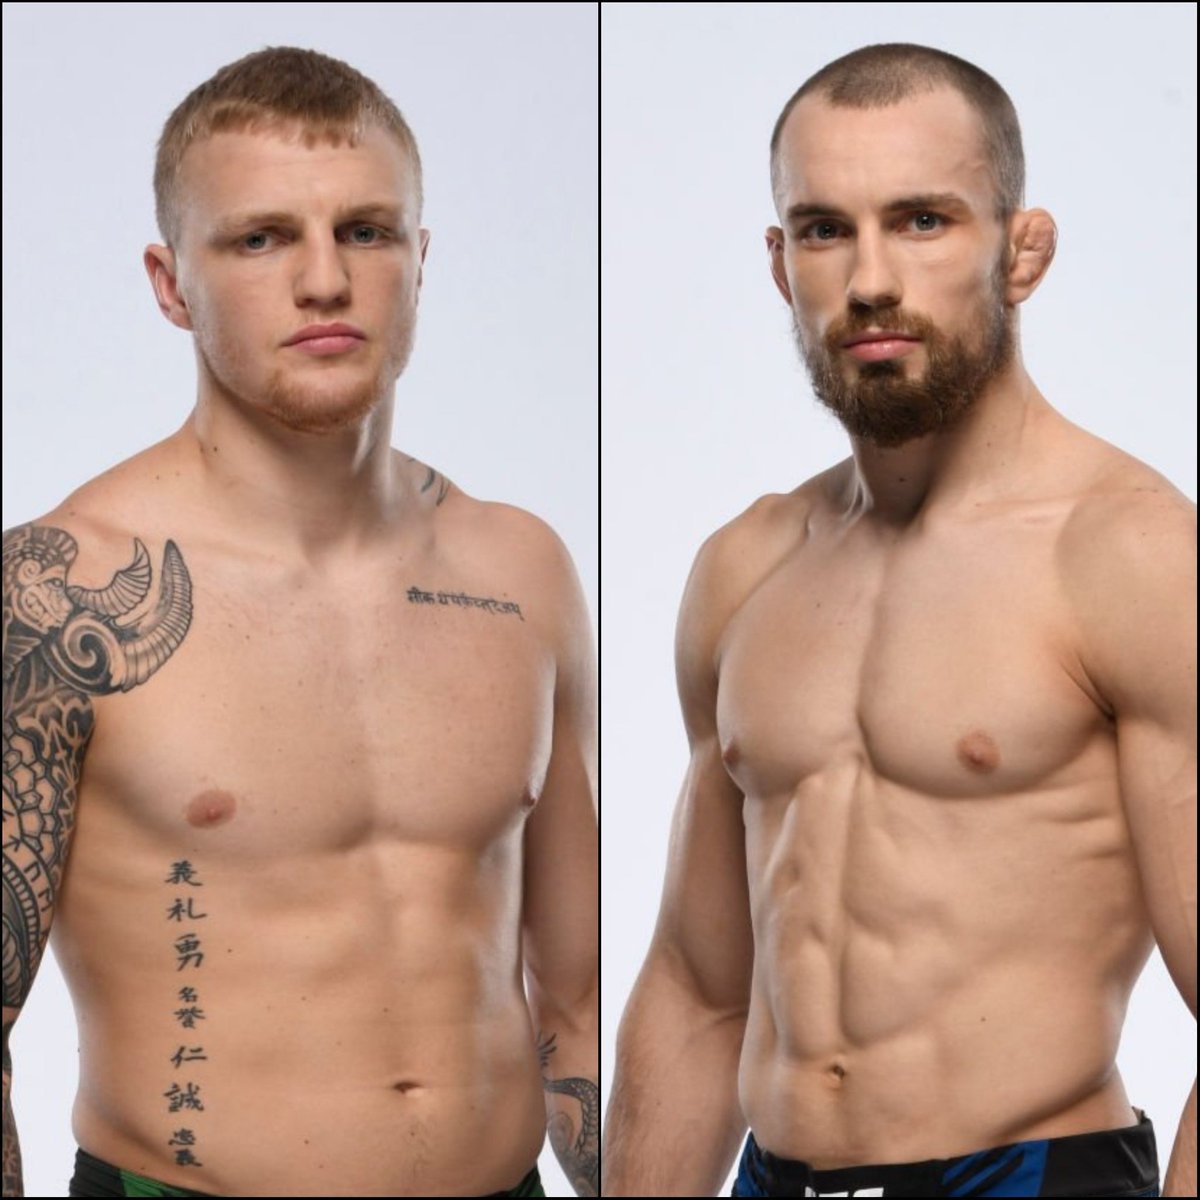 Can indeed confirm Ignacio Bahamondes is out due to visa issues (first rep. @CCLegaspi) 🚨🚨BREAKING🚨🚨 Ľudovít Klein (r) is now booked for the #UFCLondon card. He takes on Mason Jones (l) at 155 lbs on July 23rd.